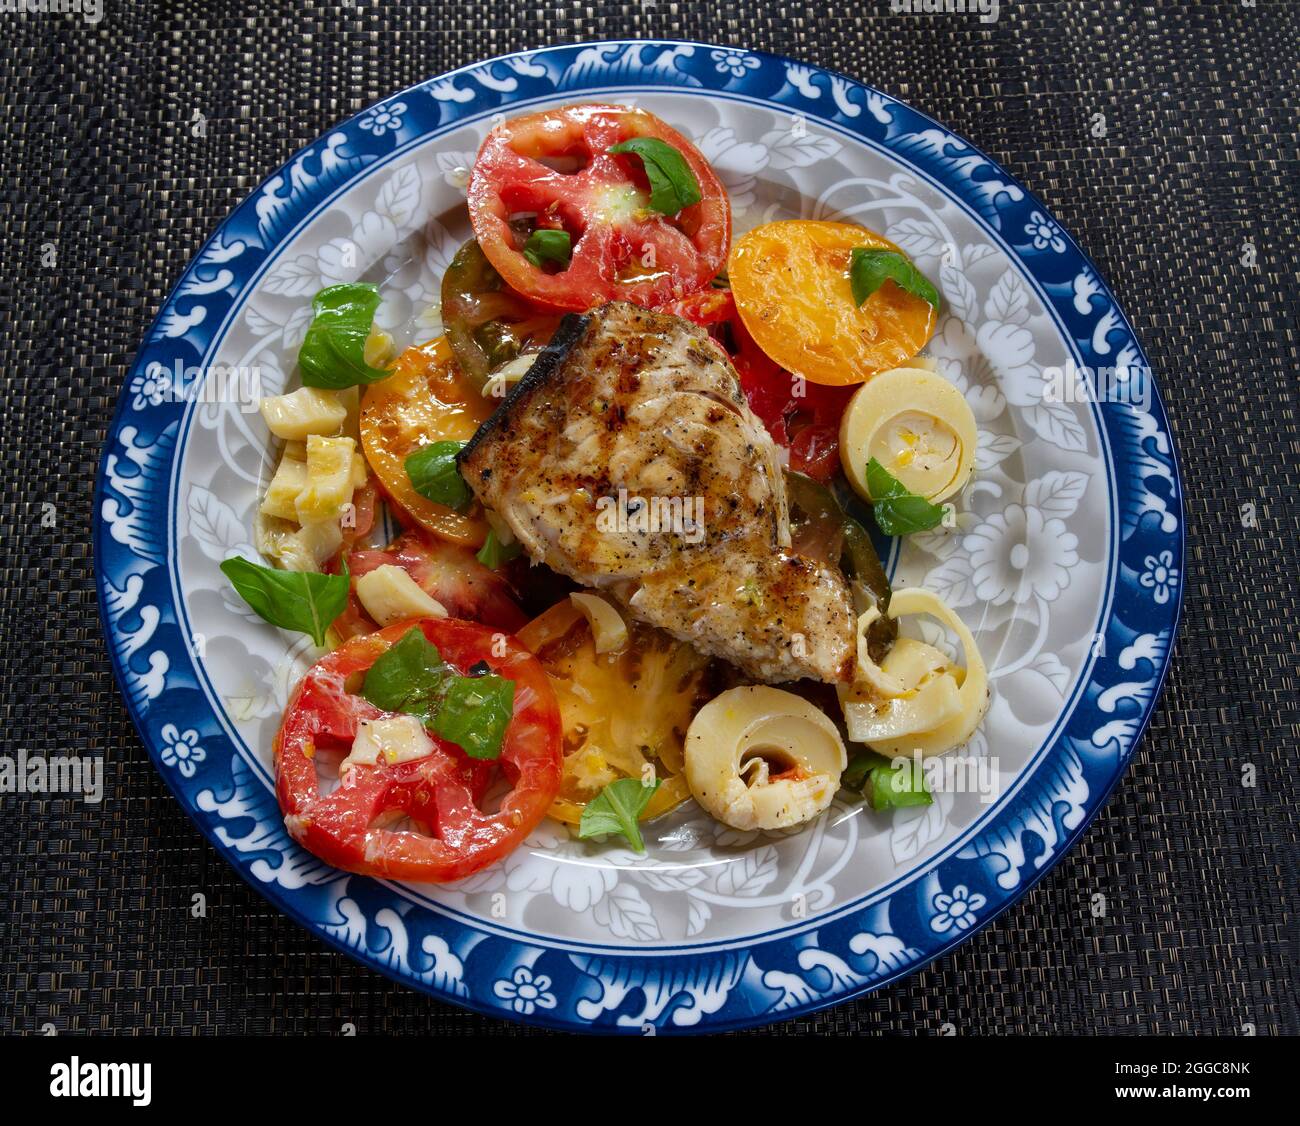 Grilled Swordfish with Heirloom Tomato's and Hearts of Palm Salad. Stock Photo